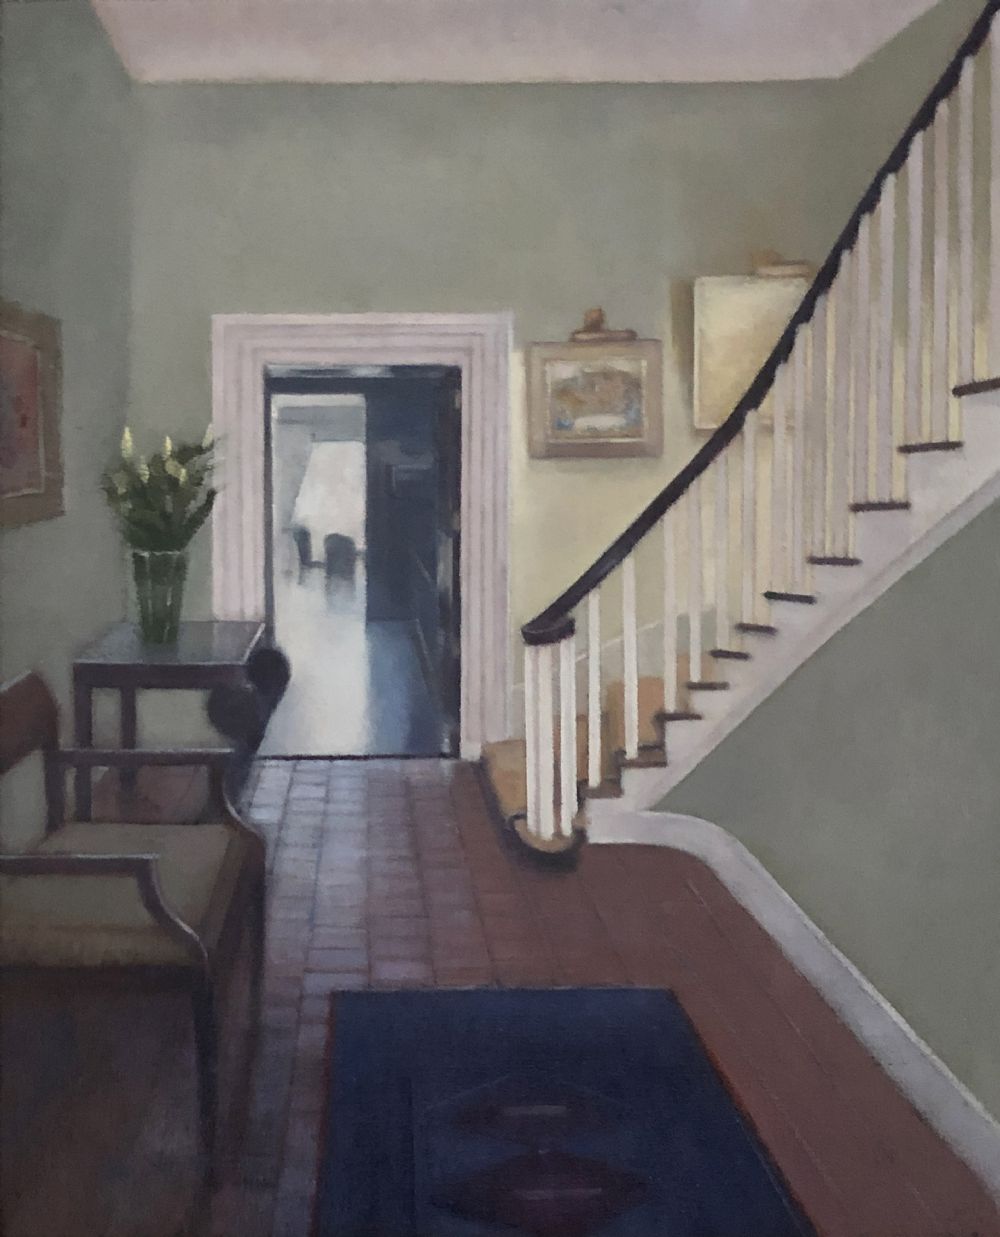 BALLYNAHINCH CASTLE, HALL & STAIRS by Rose Stapleton  at Dolan's Art Auction House